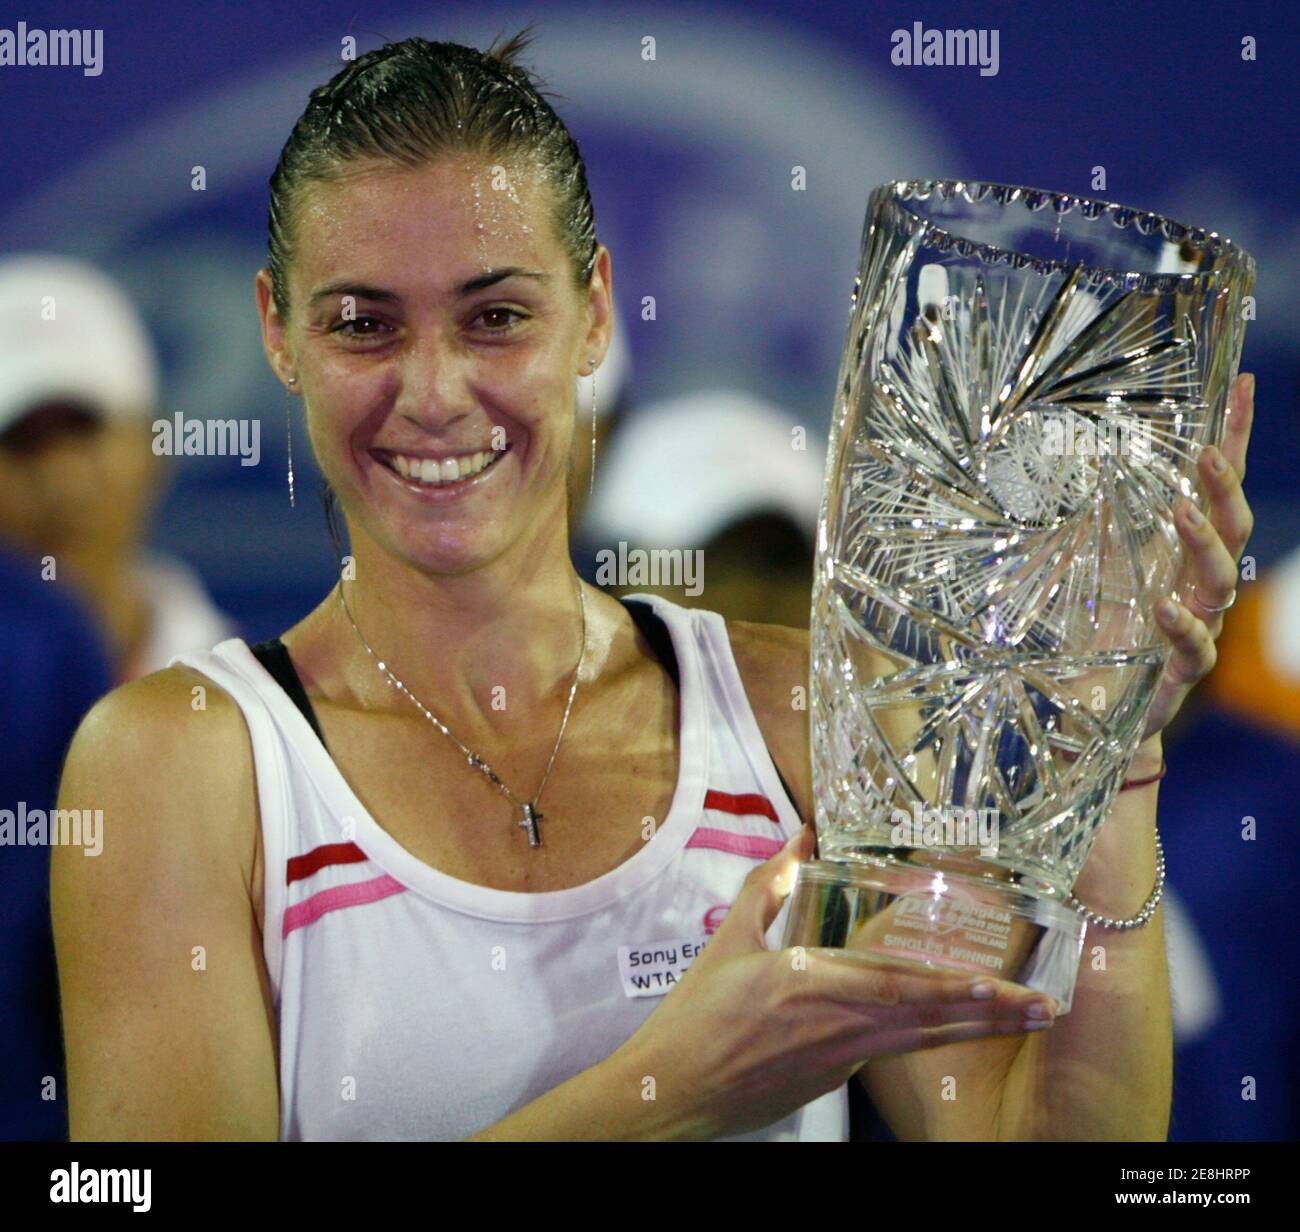 Flavia Pennetta of Italy holds the trophy after defeating Yung-Jan Chan of Taiwan during their women's final tennis match at the PTT Bangkok Open in Bangkok October 14, 2007.  Pennetta won 6-1 6-3. REUTERS/Chaiwat Subprasom (THAILAND) Stock Photo